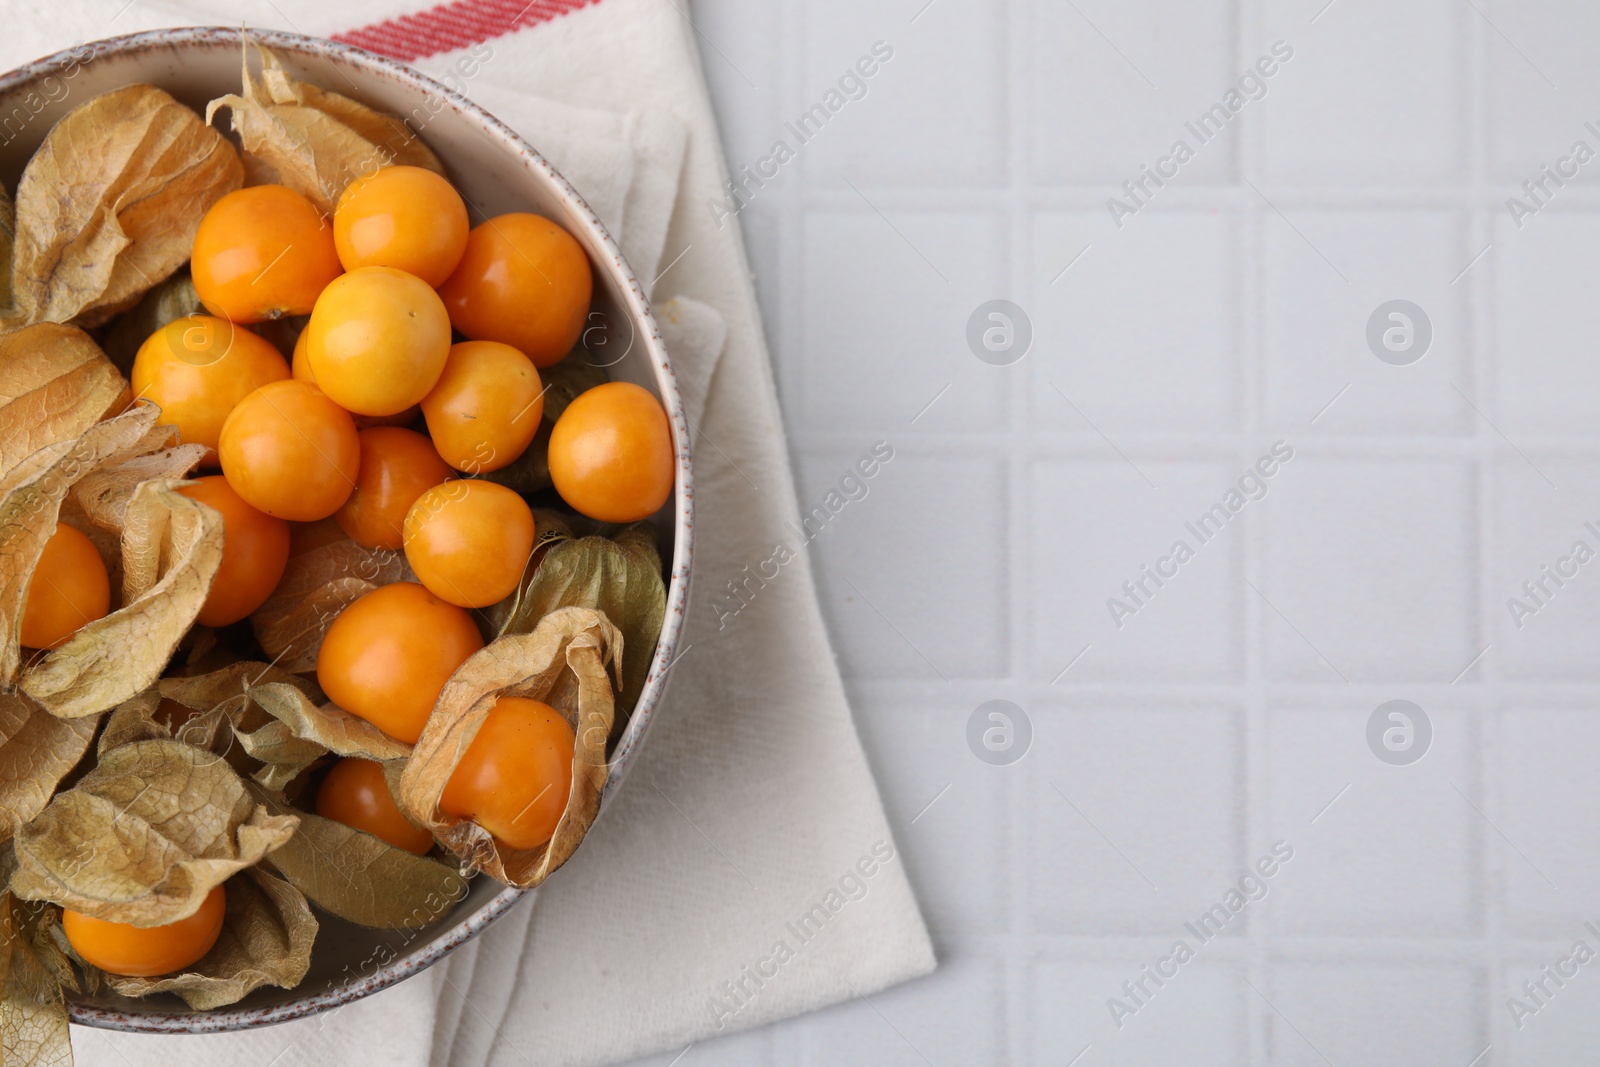 Photo of Ripe physalis fruits with calyxes in bowl on white tiled table, top view. Space for text